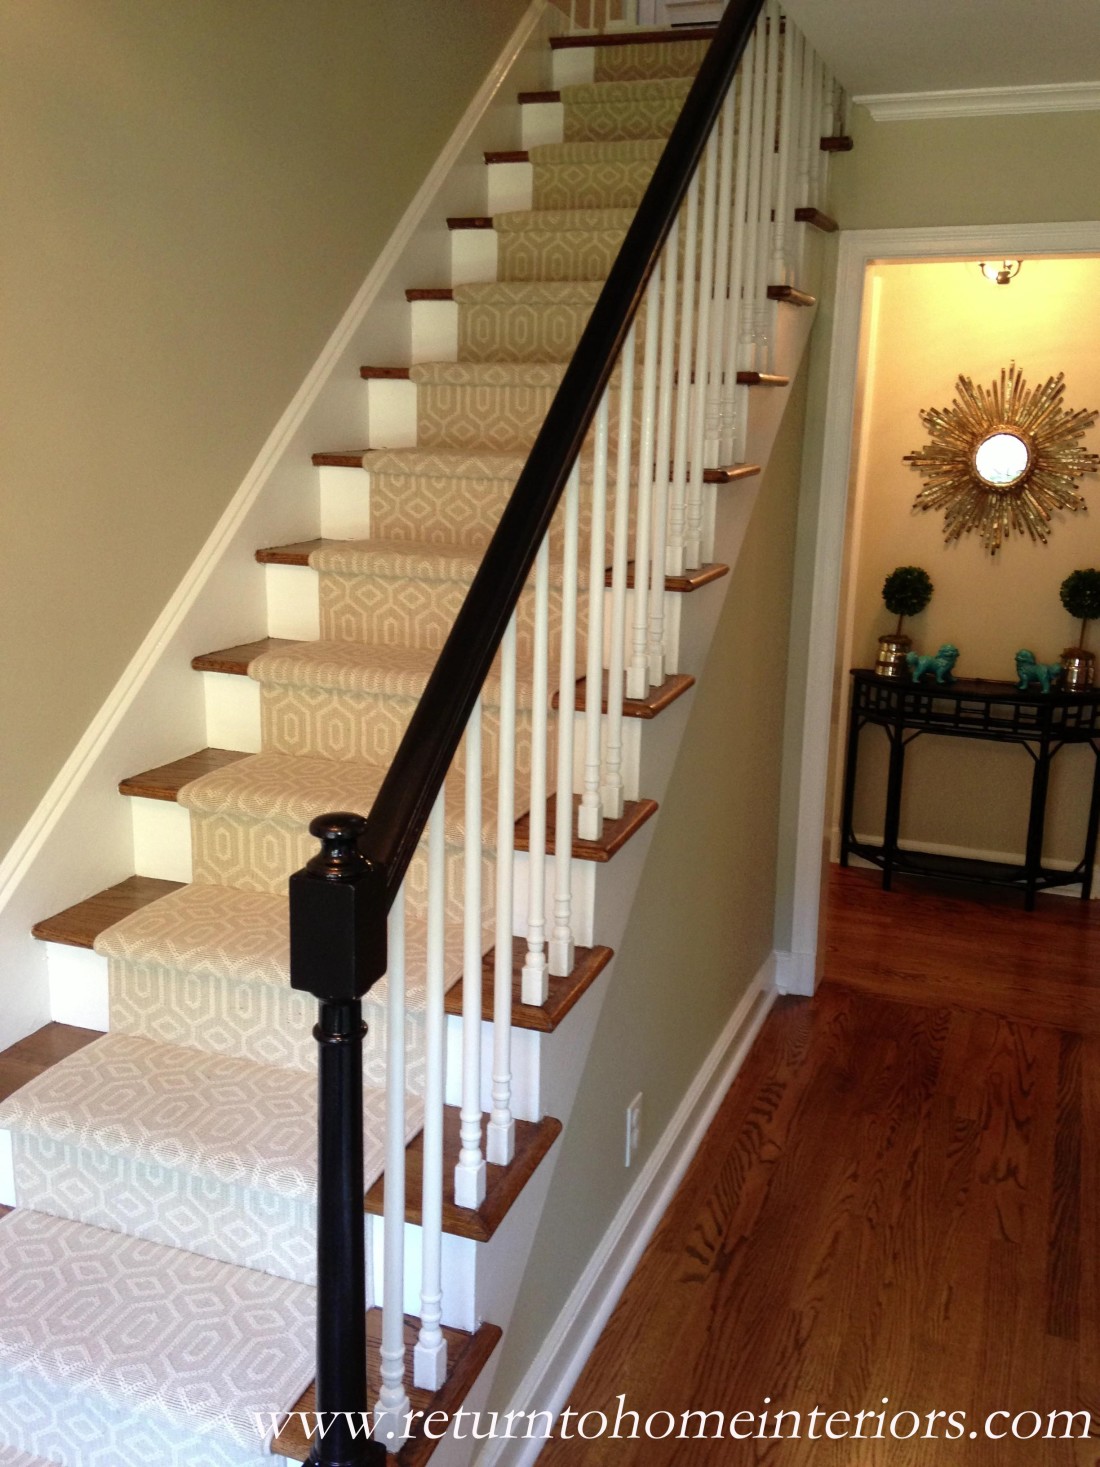 Stair case in house showing a stair runner